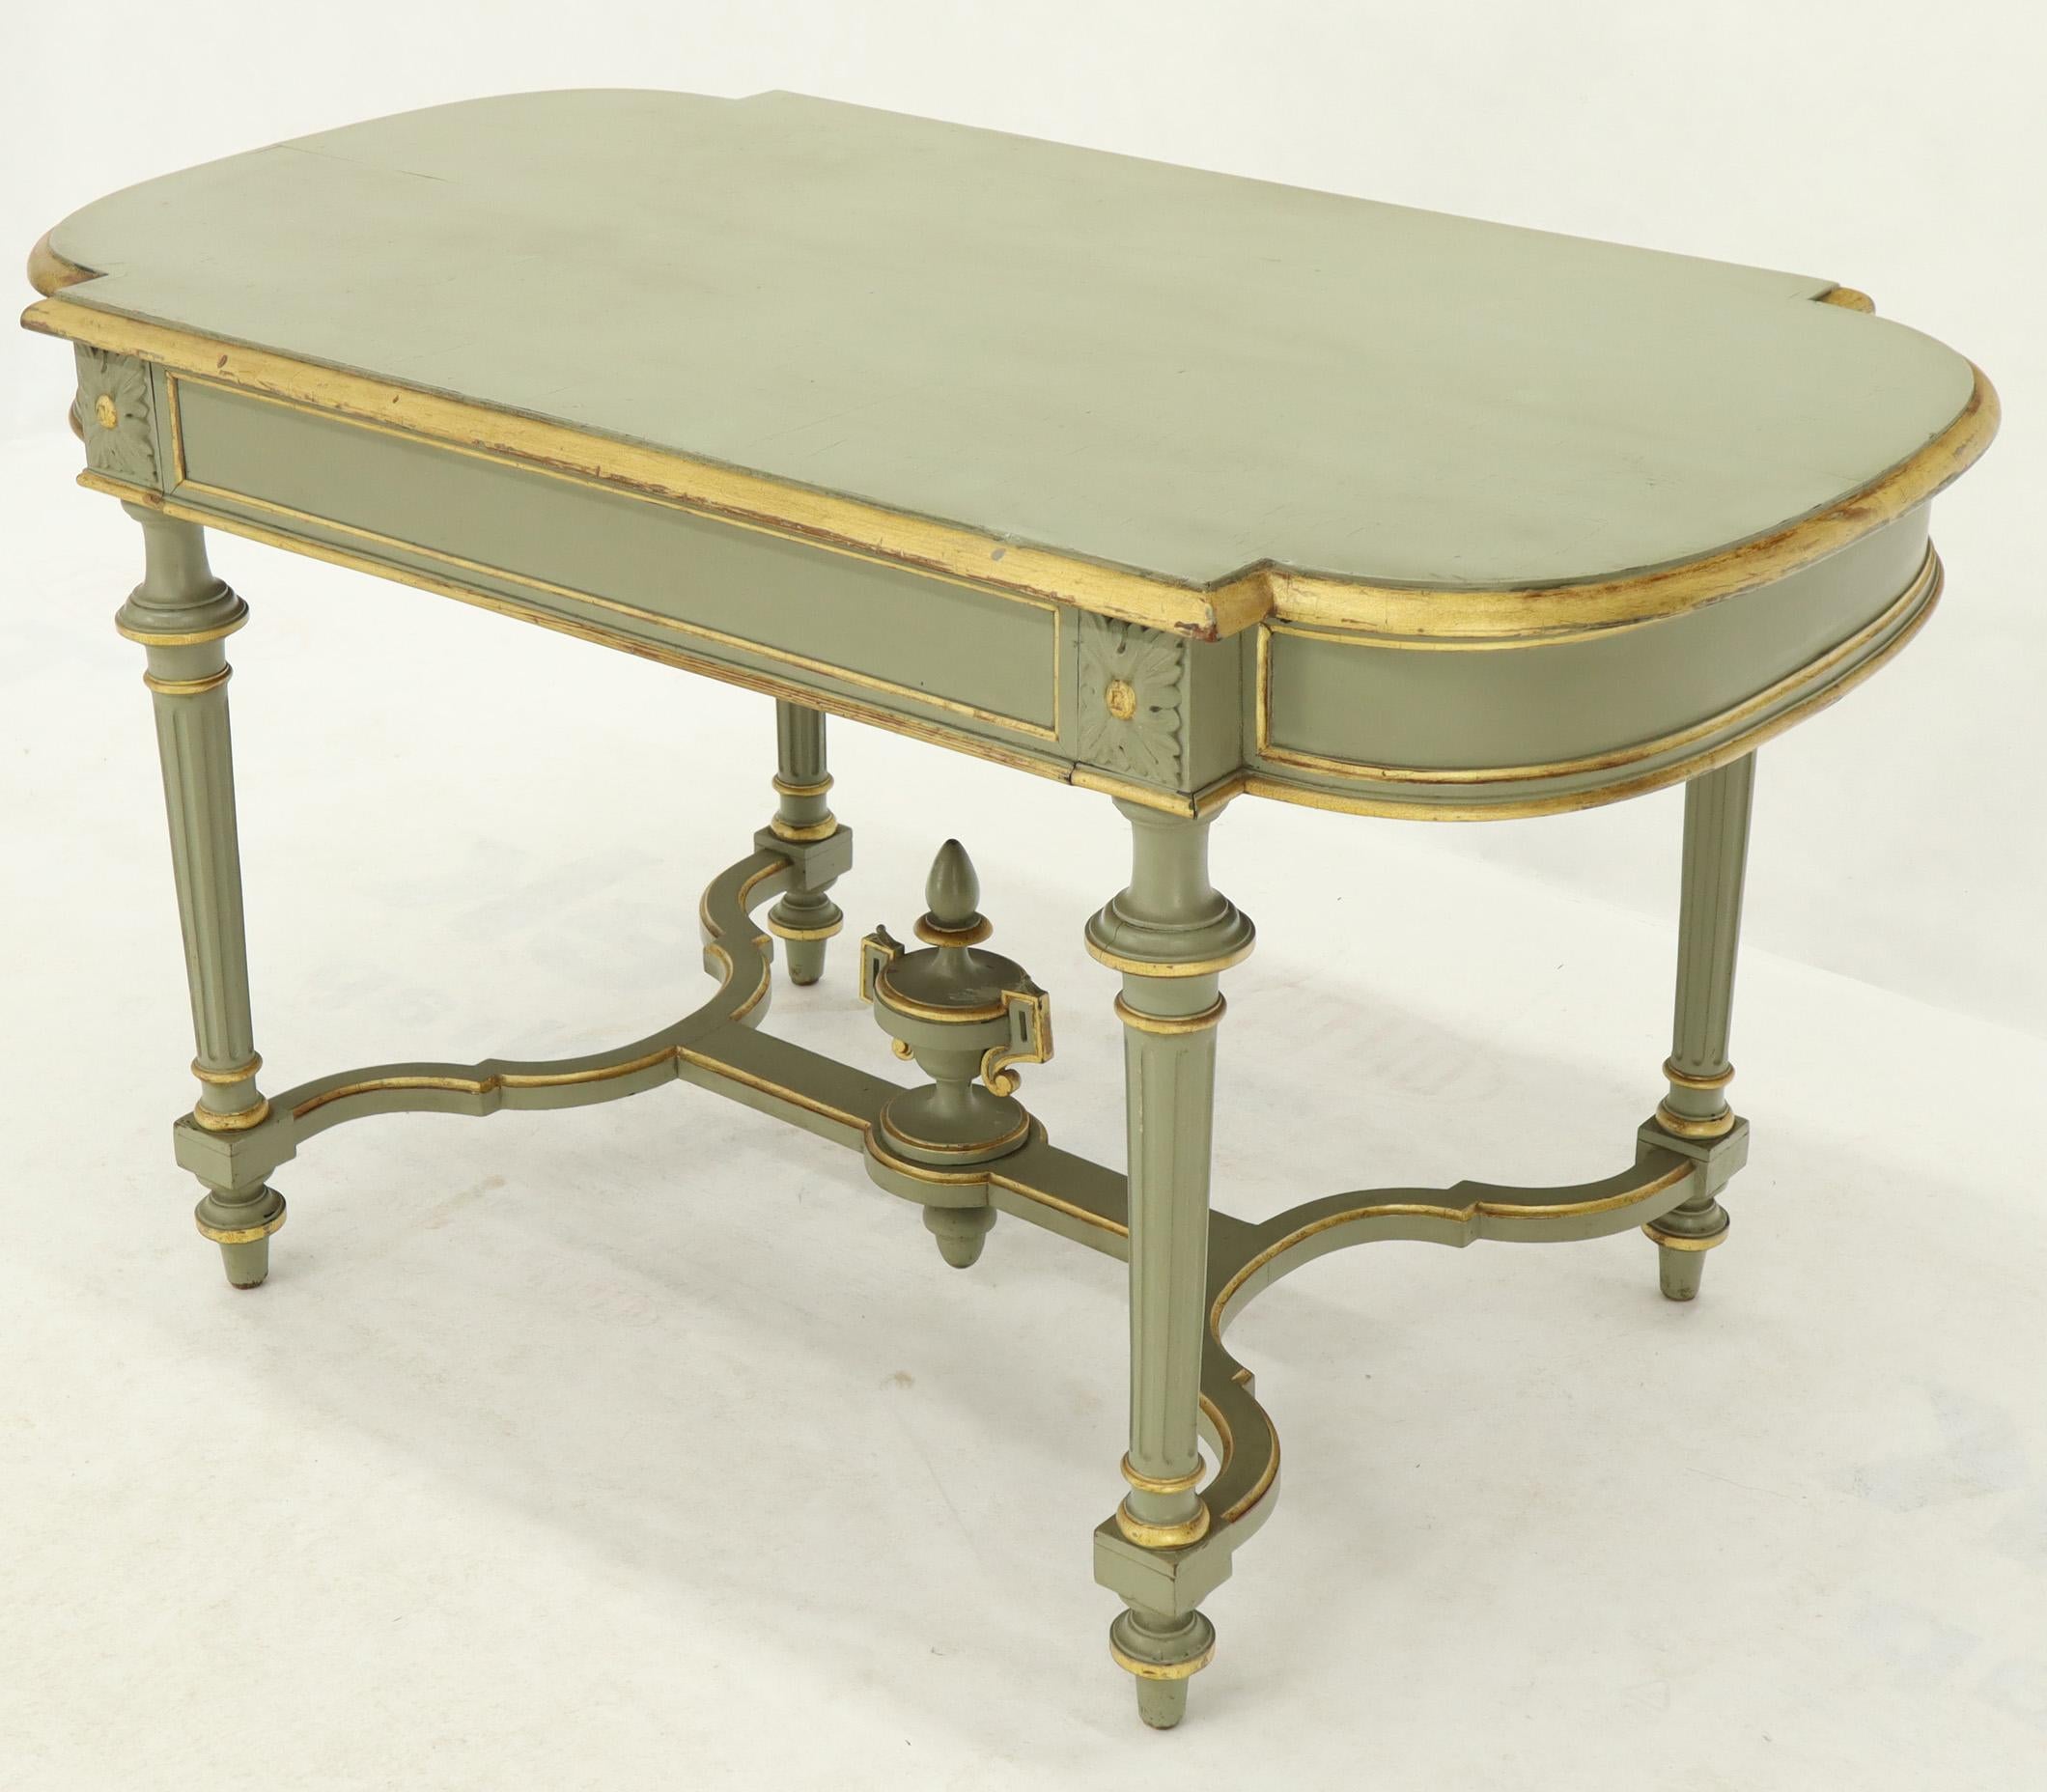 Shabby Chic and Gold Leaf Distressed Antique Table Desk Console Grande Console en vente 3